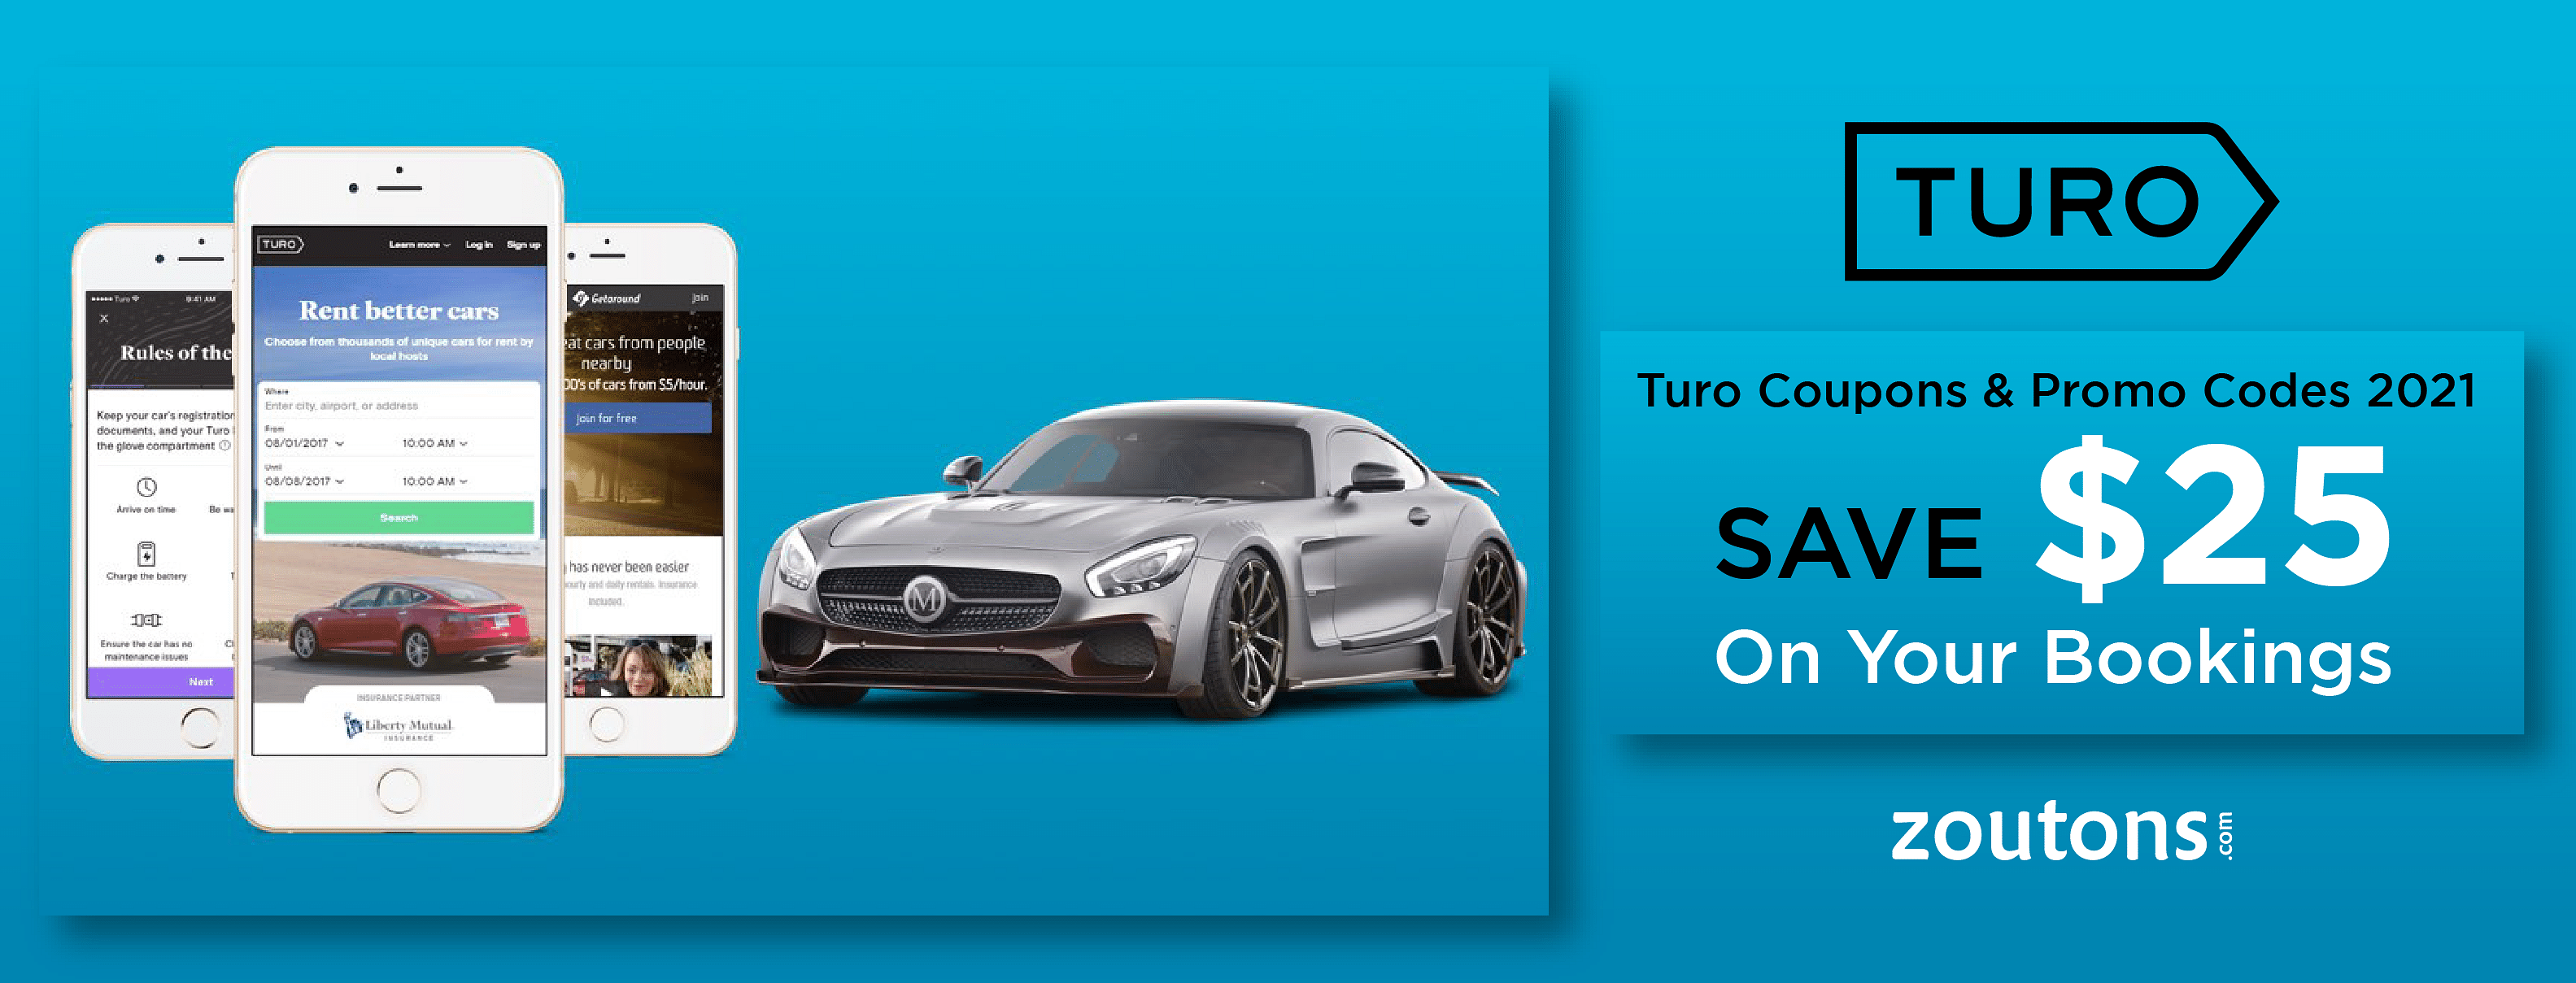 Use Turo Coupons & Promo Codes 2022 To Slash 10 On All Your Booking